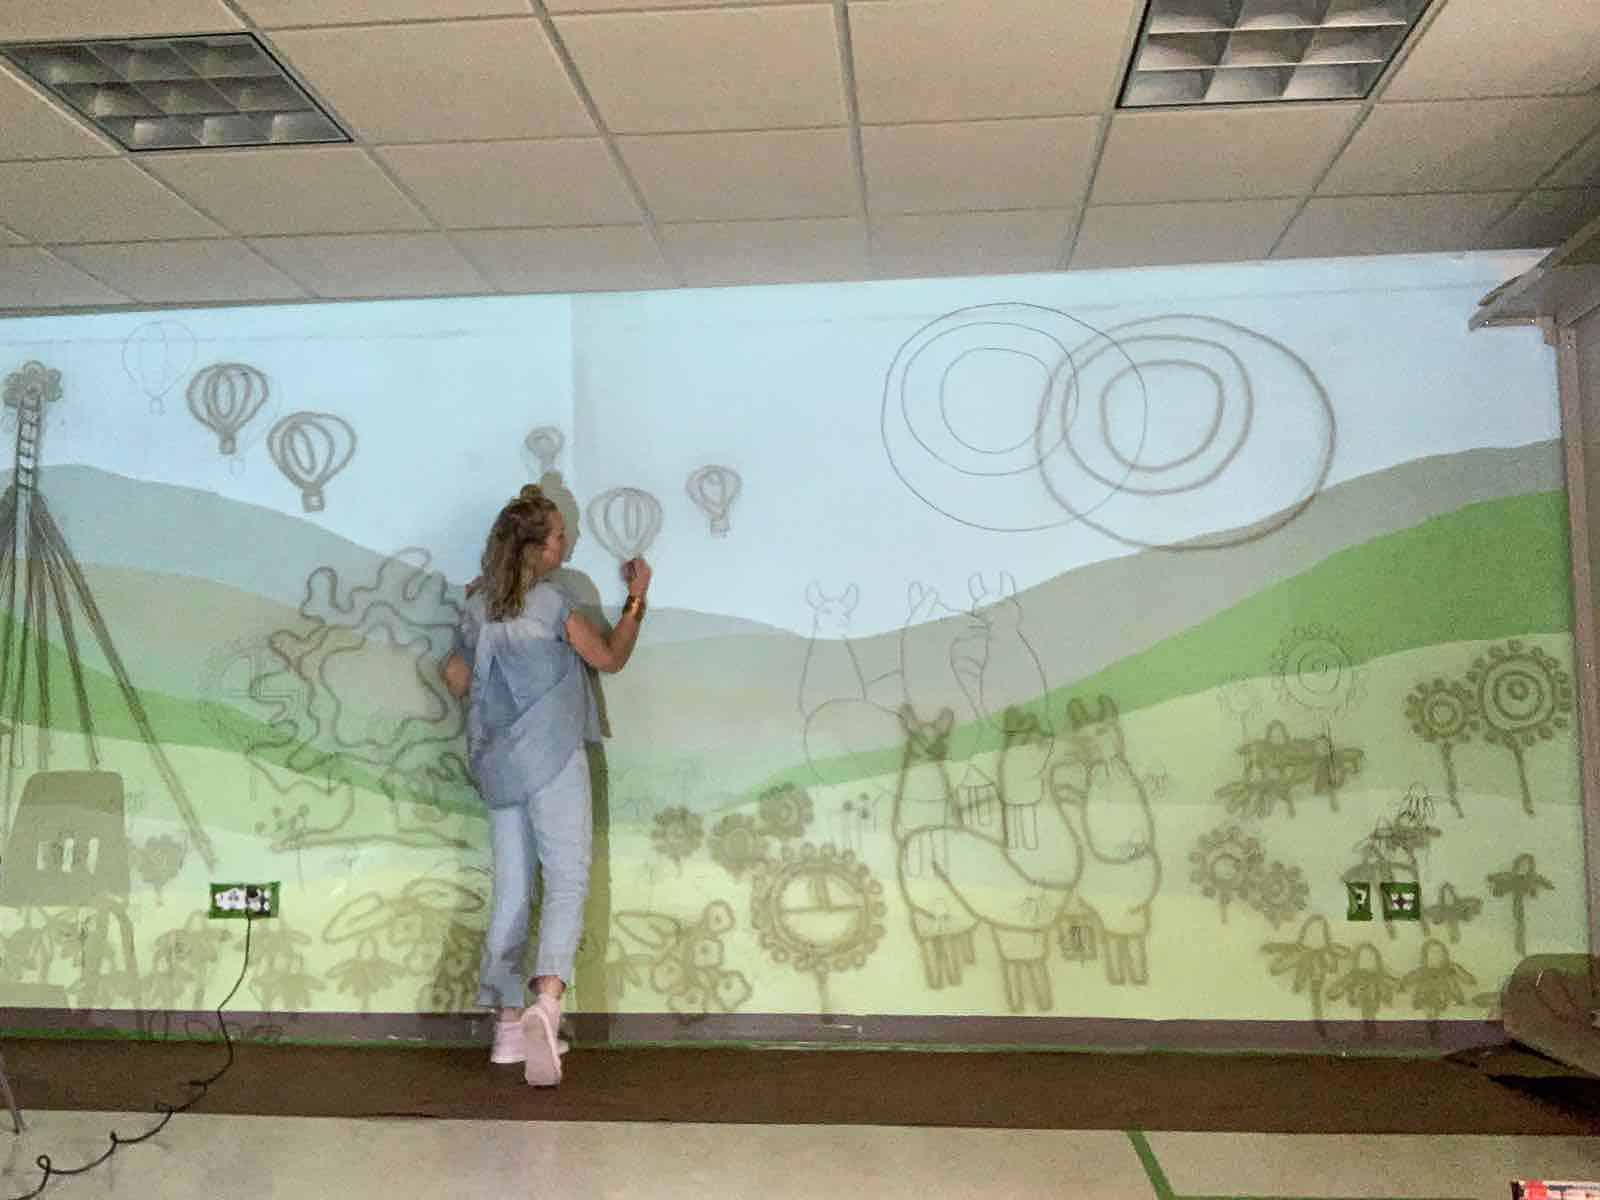 working on classroom mural